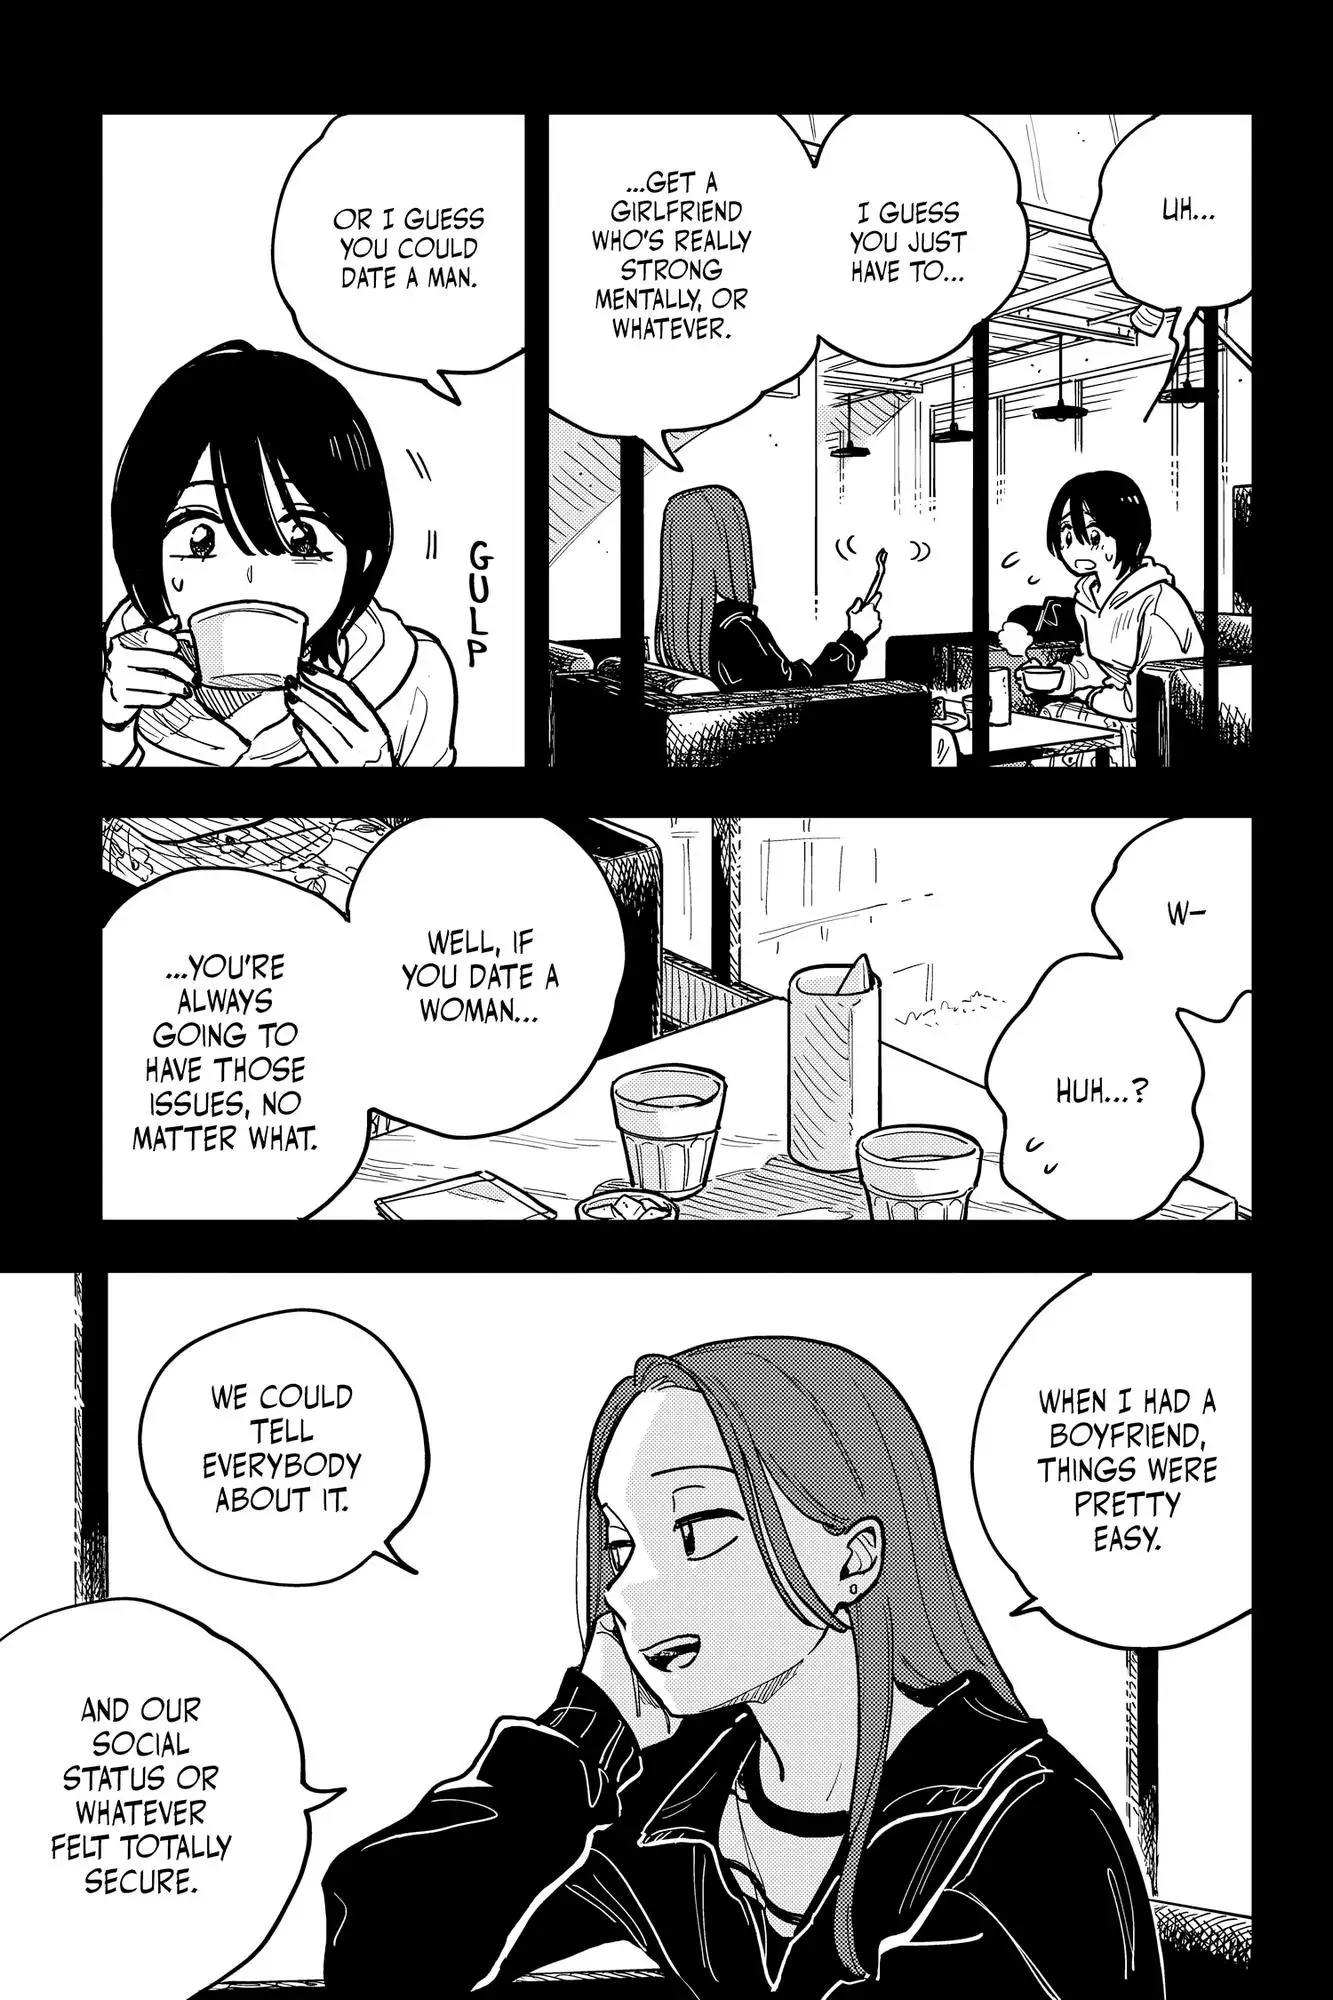 So, Do You Wanna Go Out, Or? - 51 page 10-01c16bdc